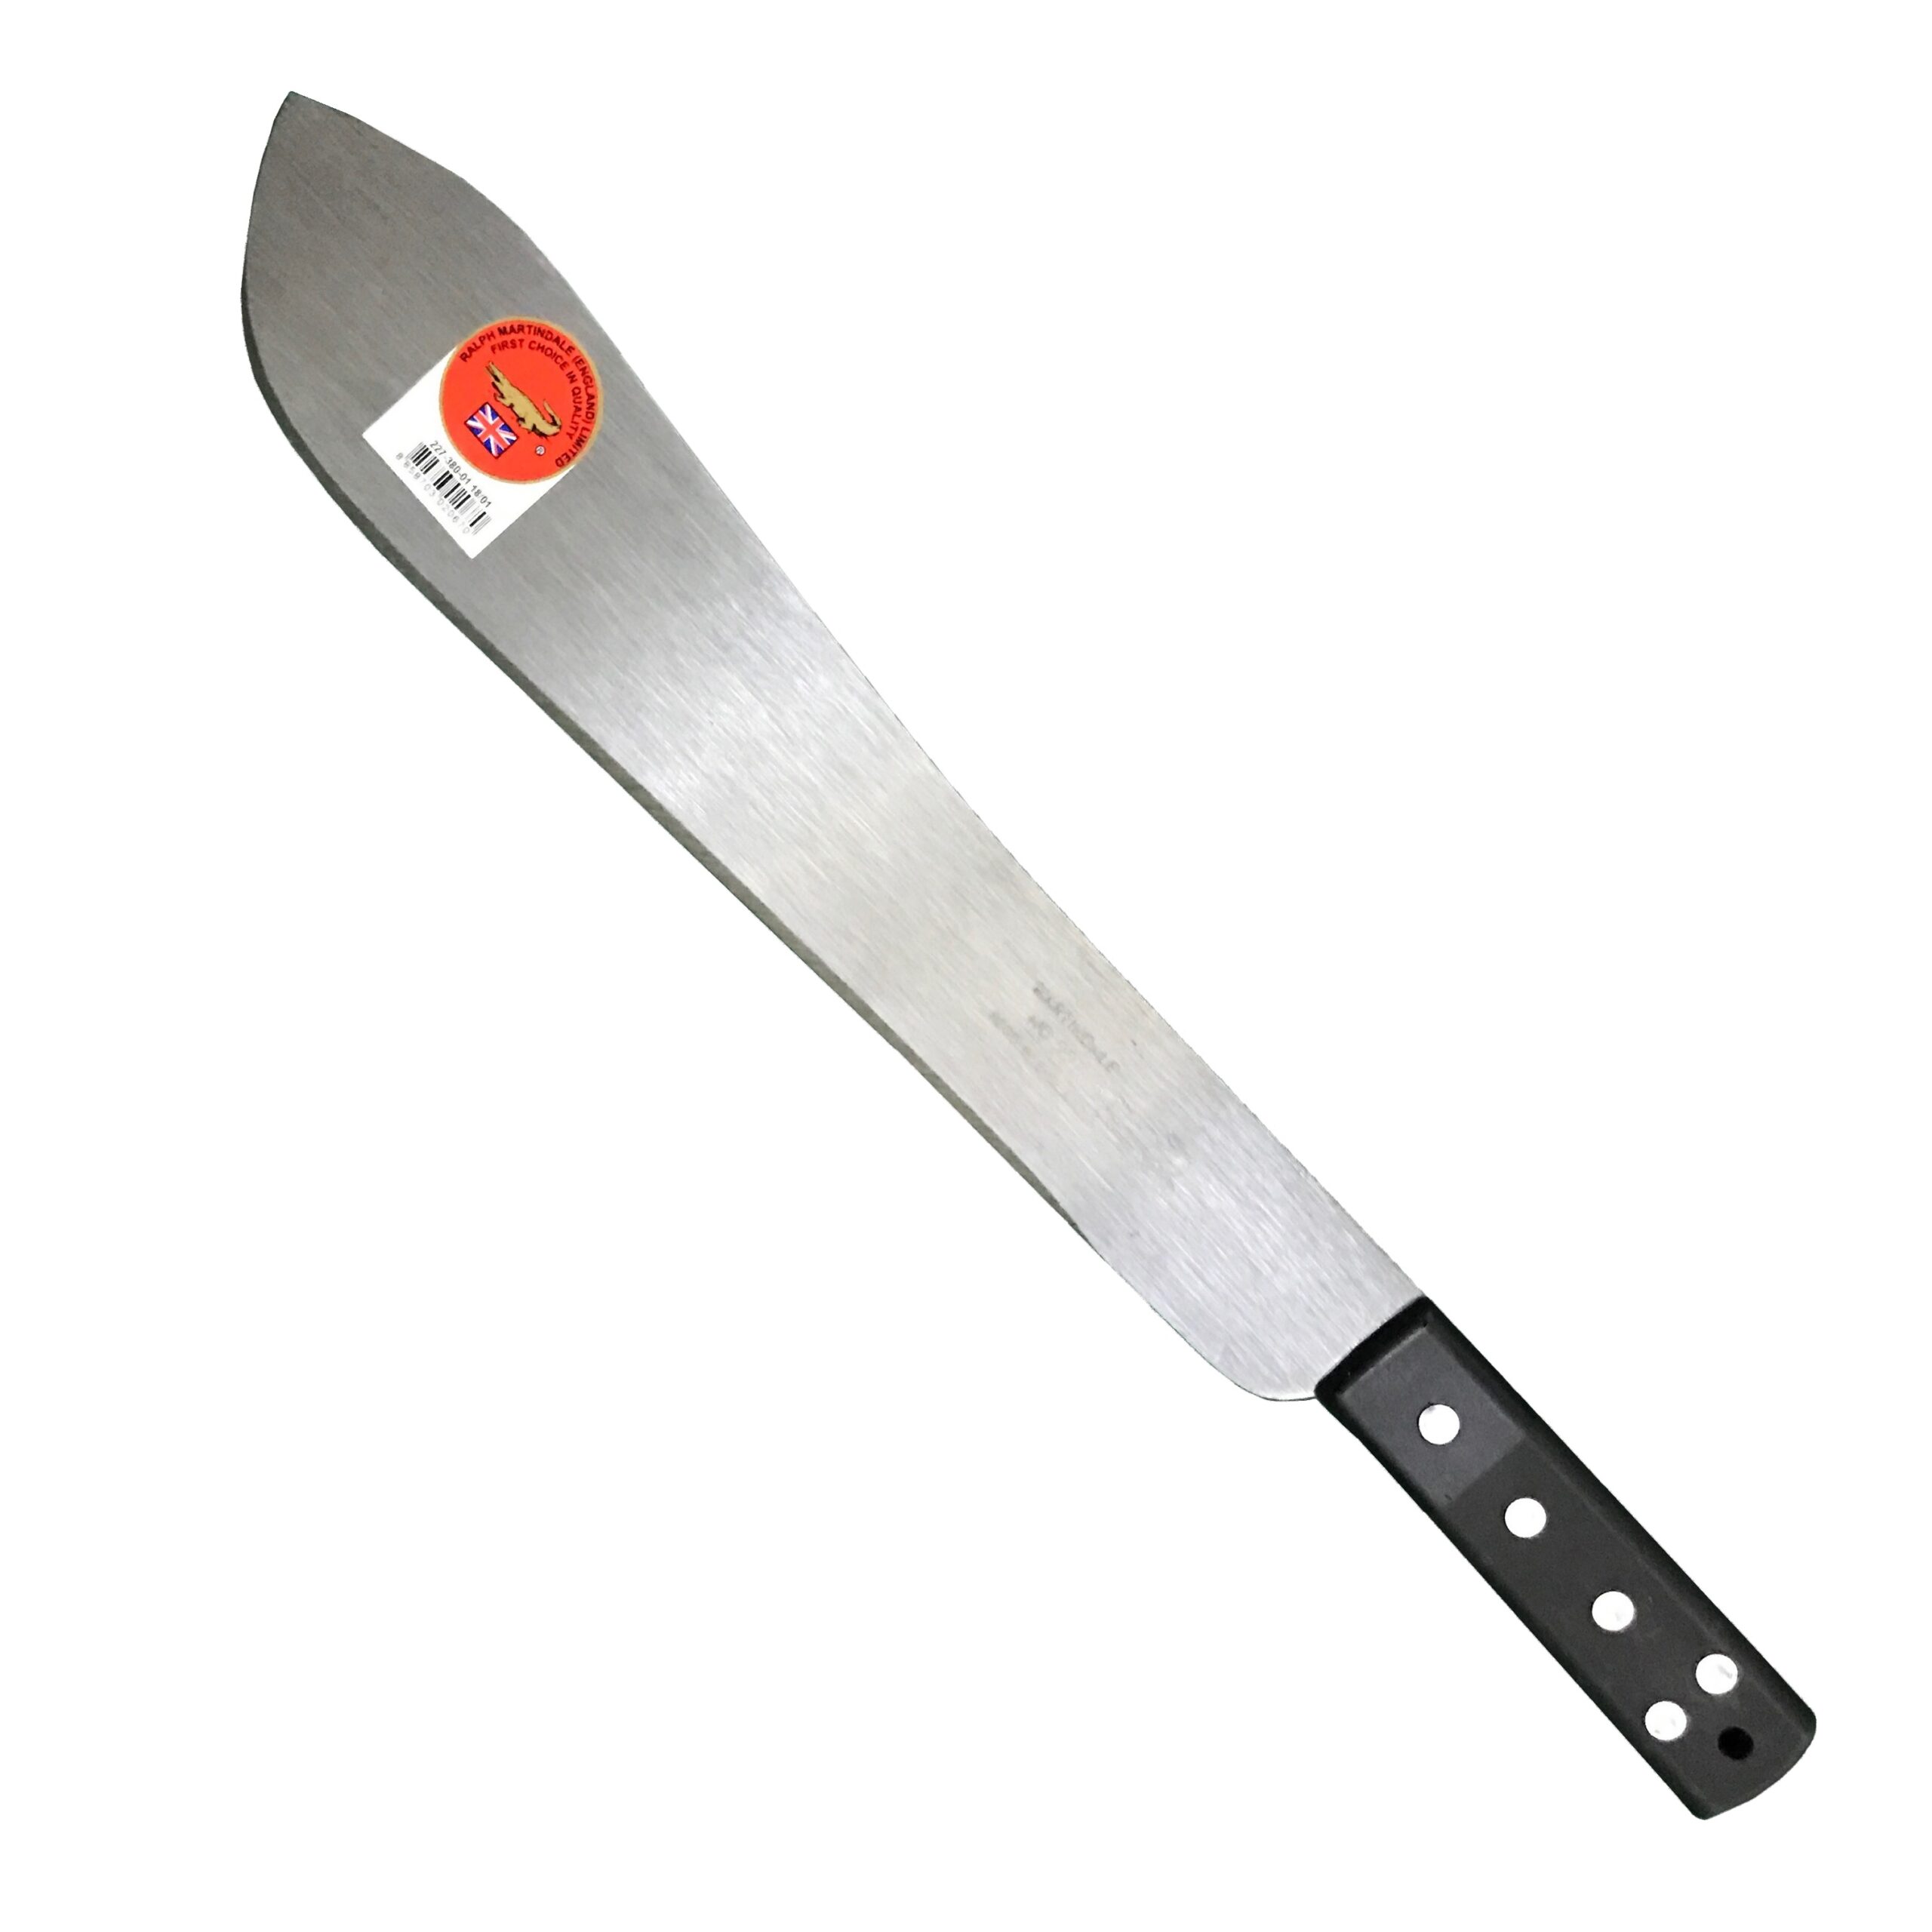 https://www.machetespecialists.com/wp-content/uploads/2018/05/Martindale-15-Inch-Bolo-Cleaver-Plastic-Handle-Front-scaled.jpg